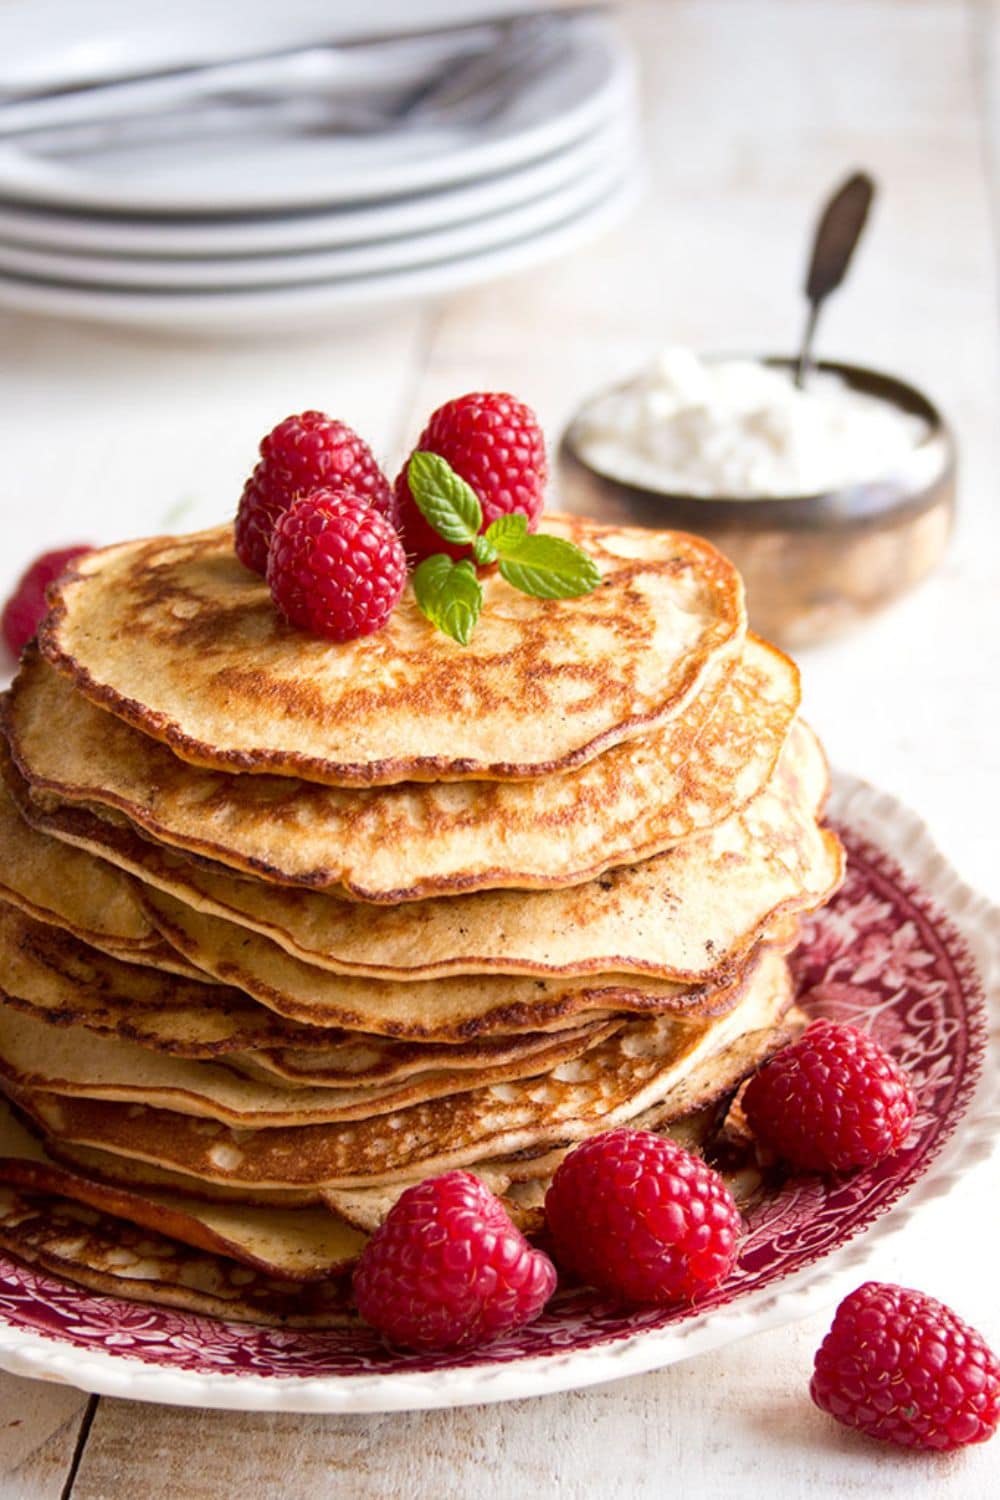 Keto Breakfast stack of pancakes with raspberries on top served on a dish